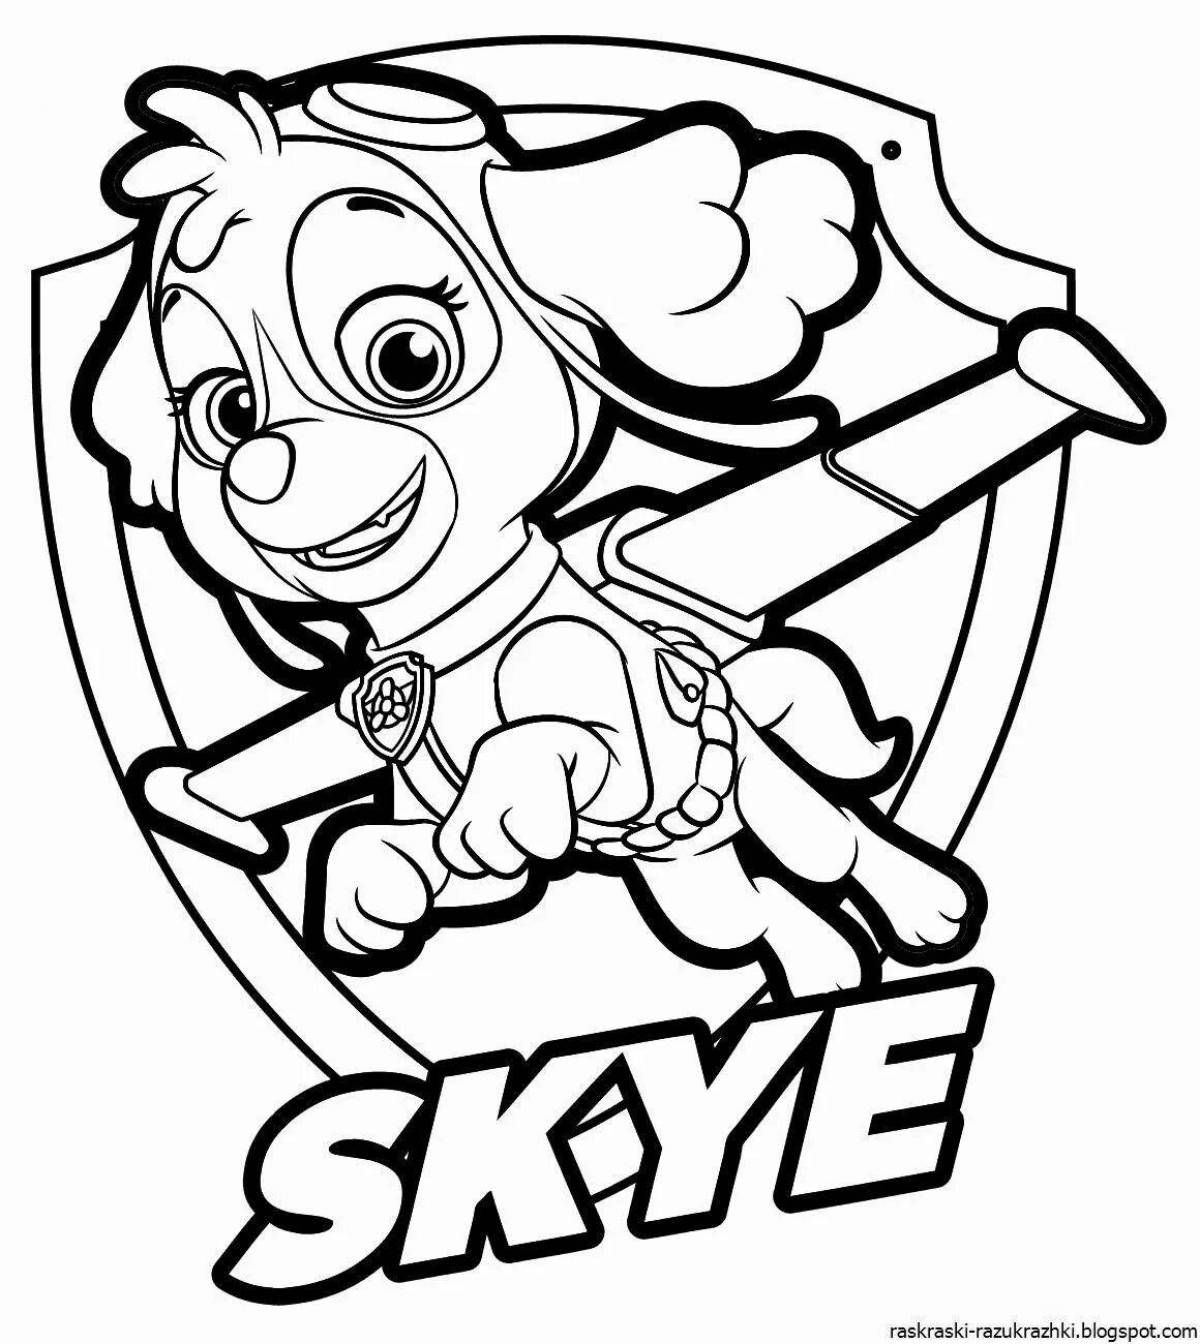 Coloring page adorable paw patrol